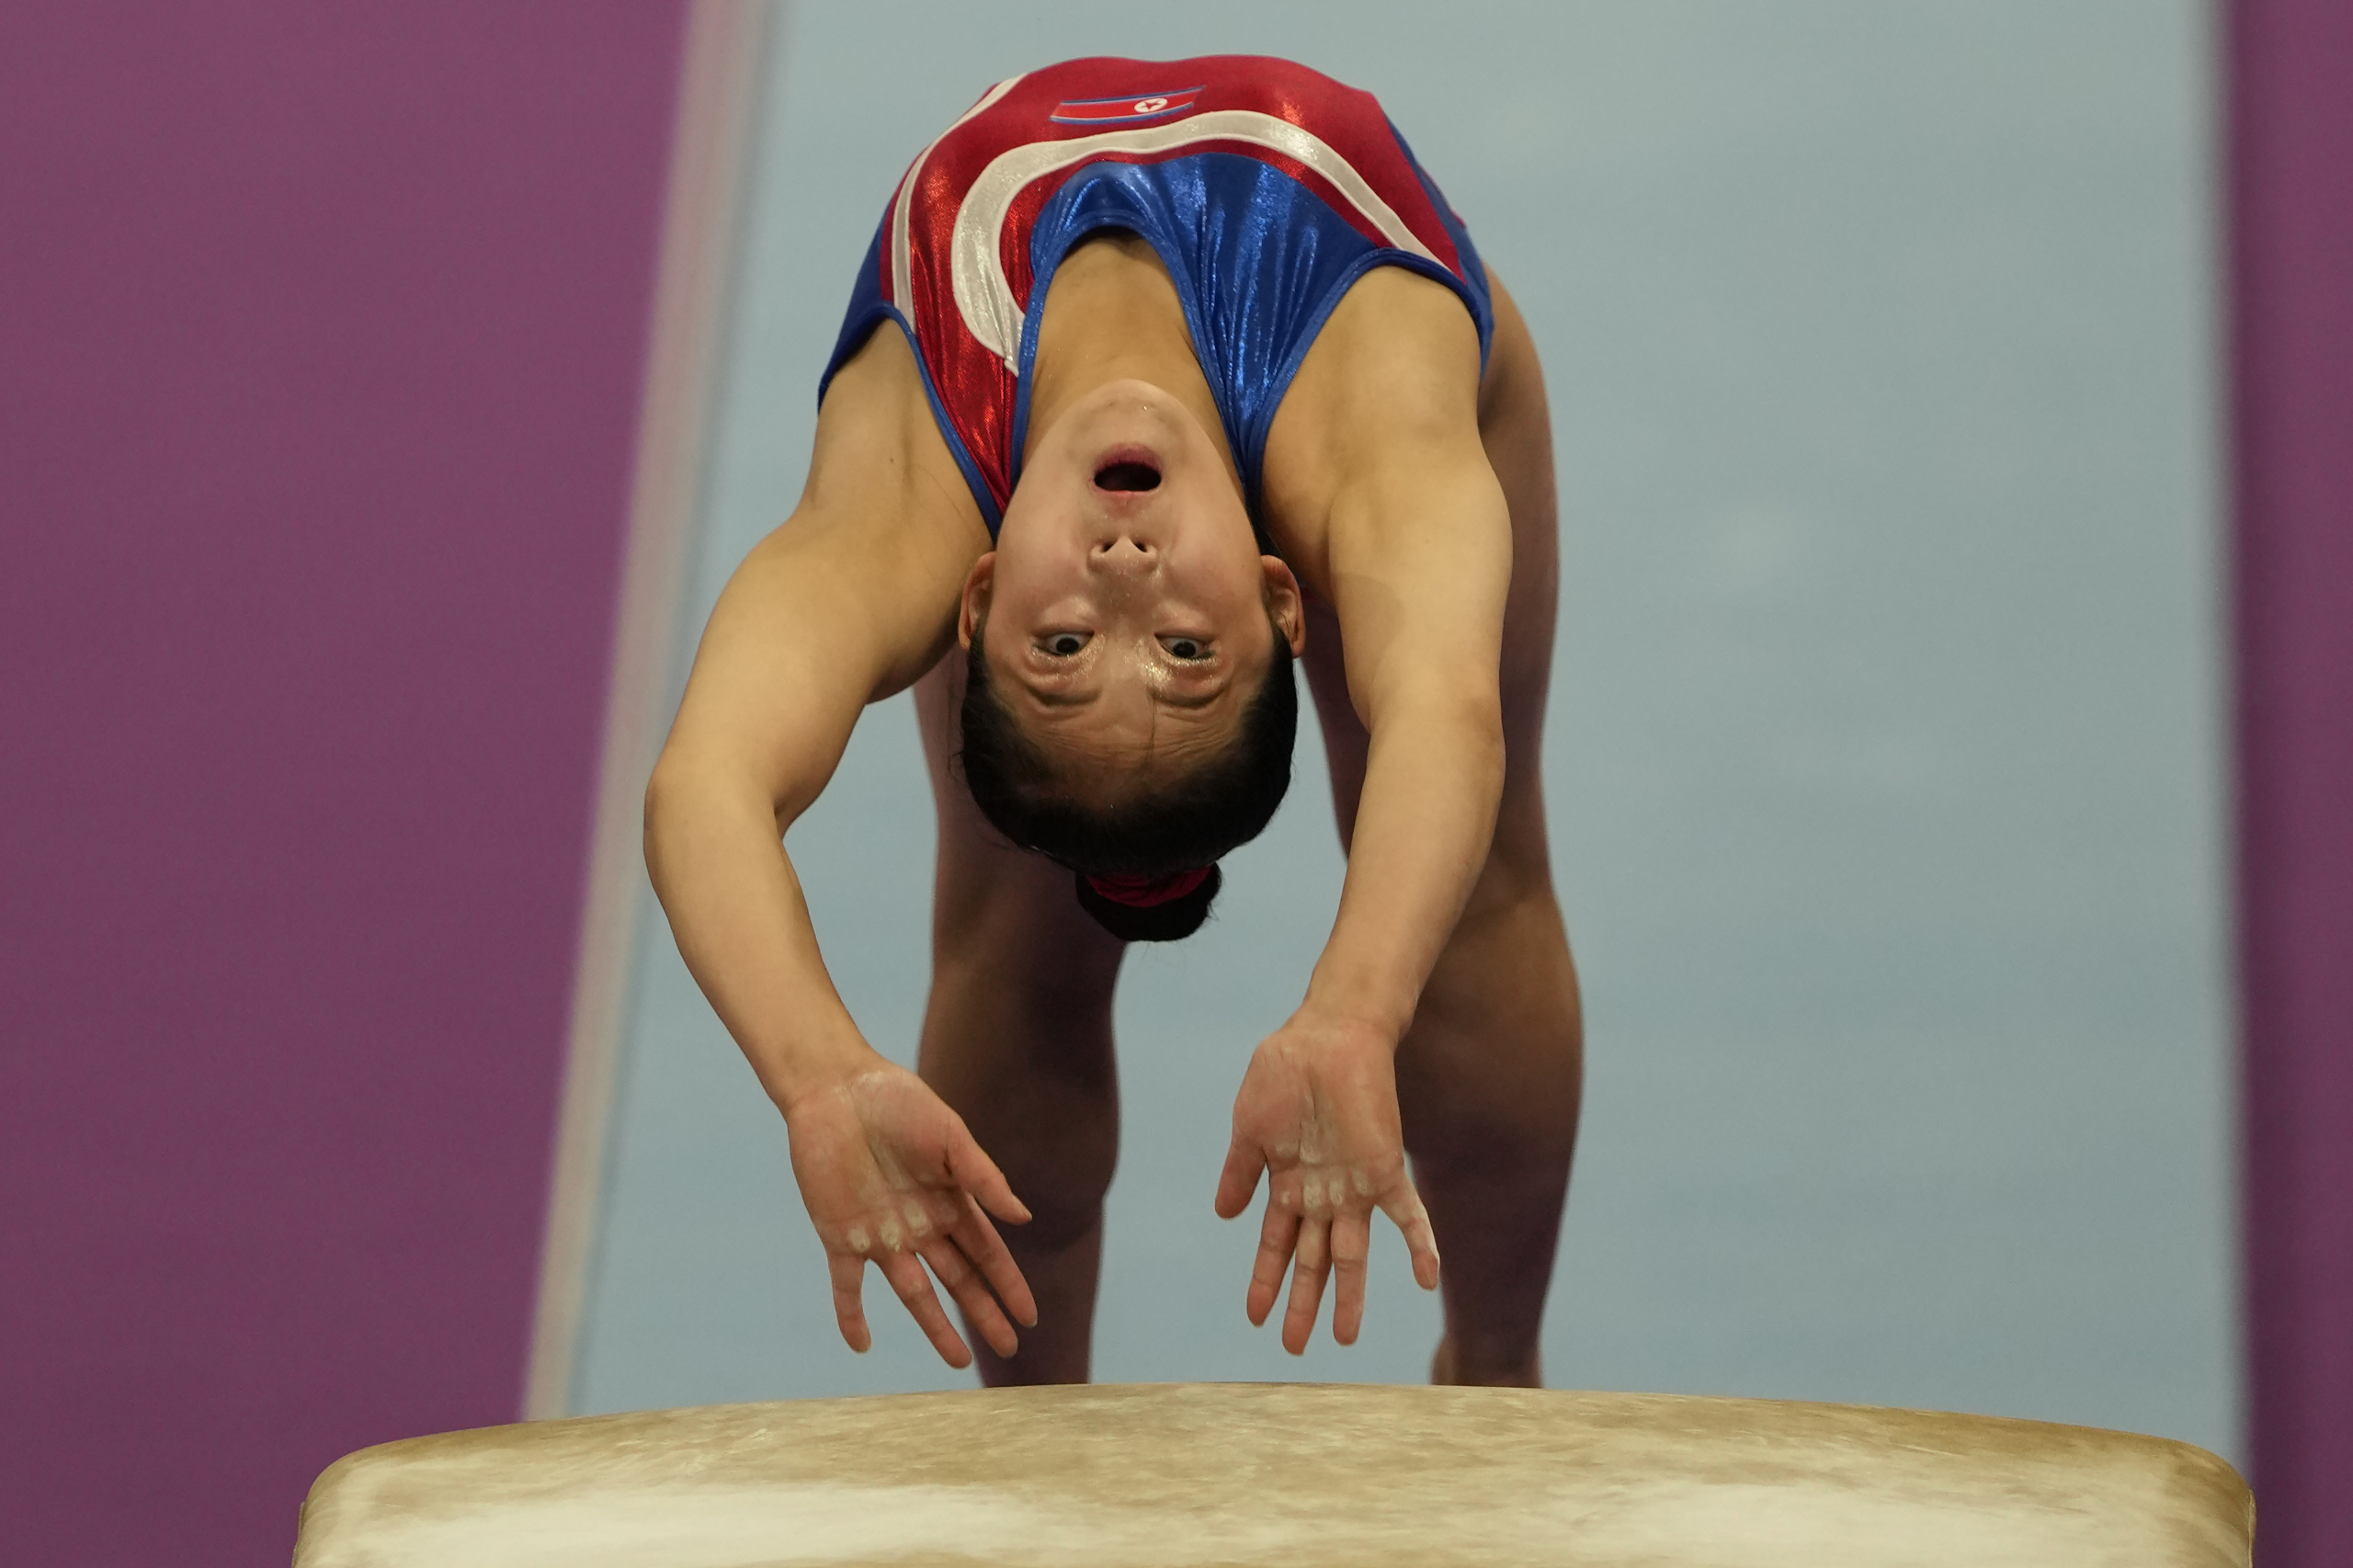 North Korea's An Changok competes on her way the gold medal for the Artistic Gymnastics Women's Vault event of the 19th Asian Games in Hangzhou, China, Thursday, Sept. 28, 2023. (AP Photo/Ng Han Guan)